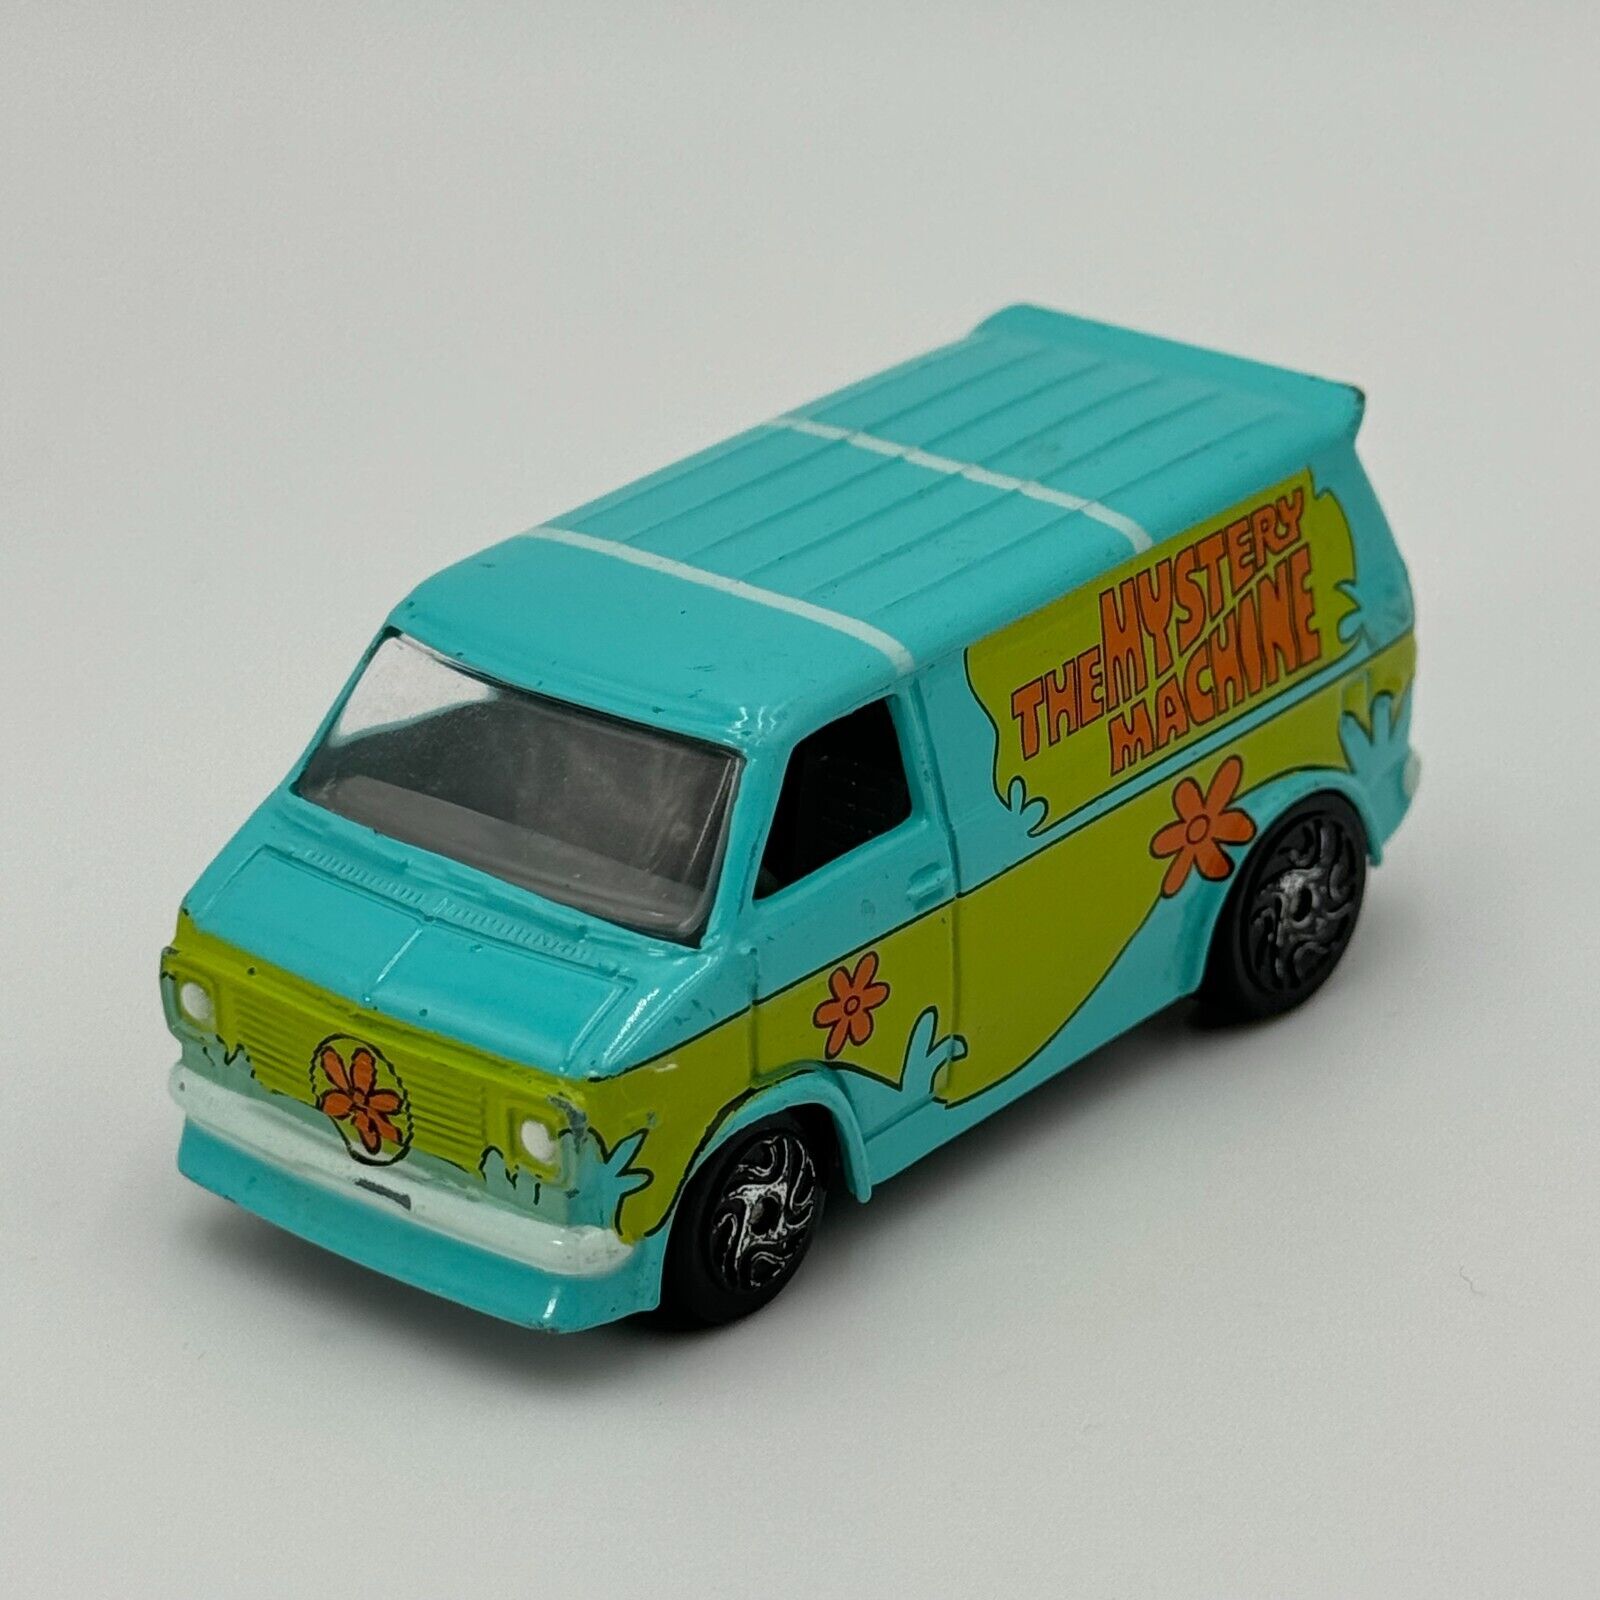 Scooby Doo Collection Rare Vintage Racing Champions 75 Chevy Van Mistery Machine